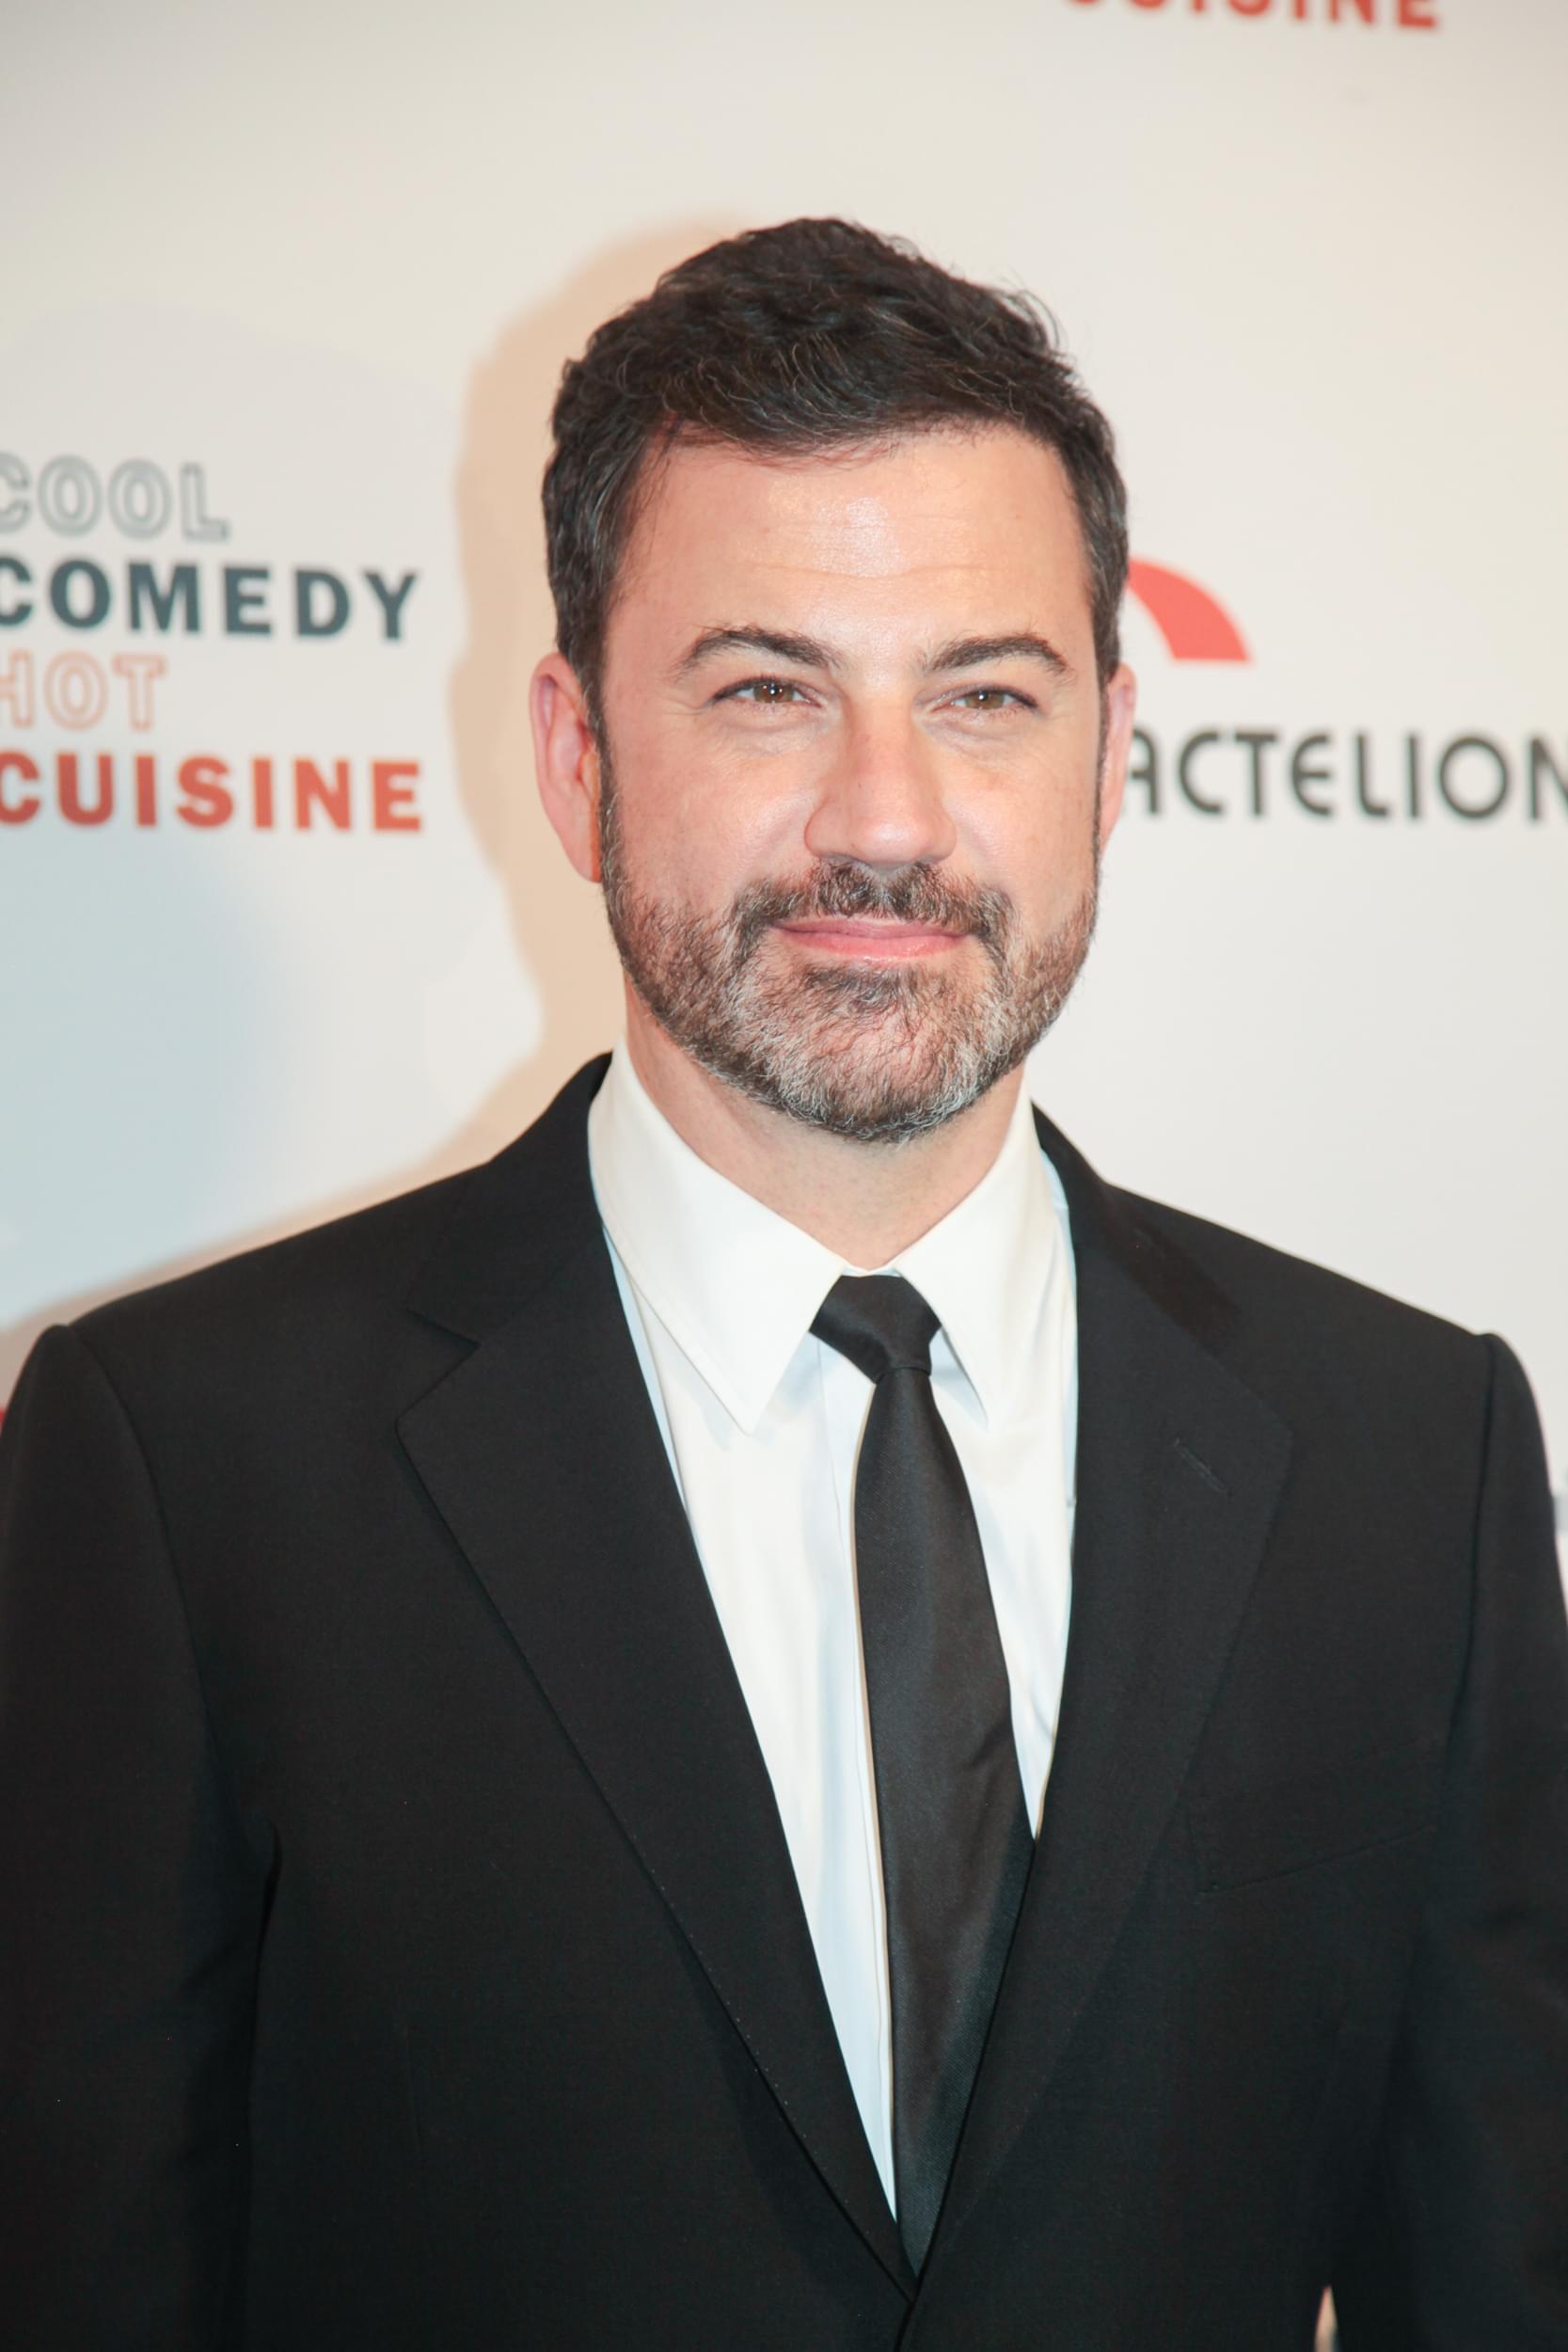 Jimmy Kimmel Offers Up Some Advice For Dealing With Donald Trump [WATCH]